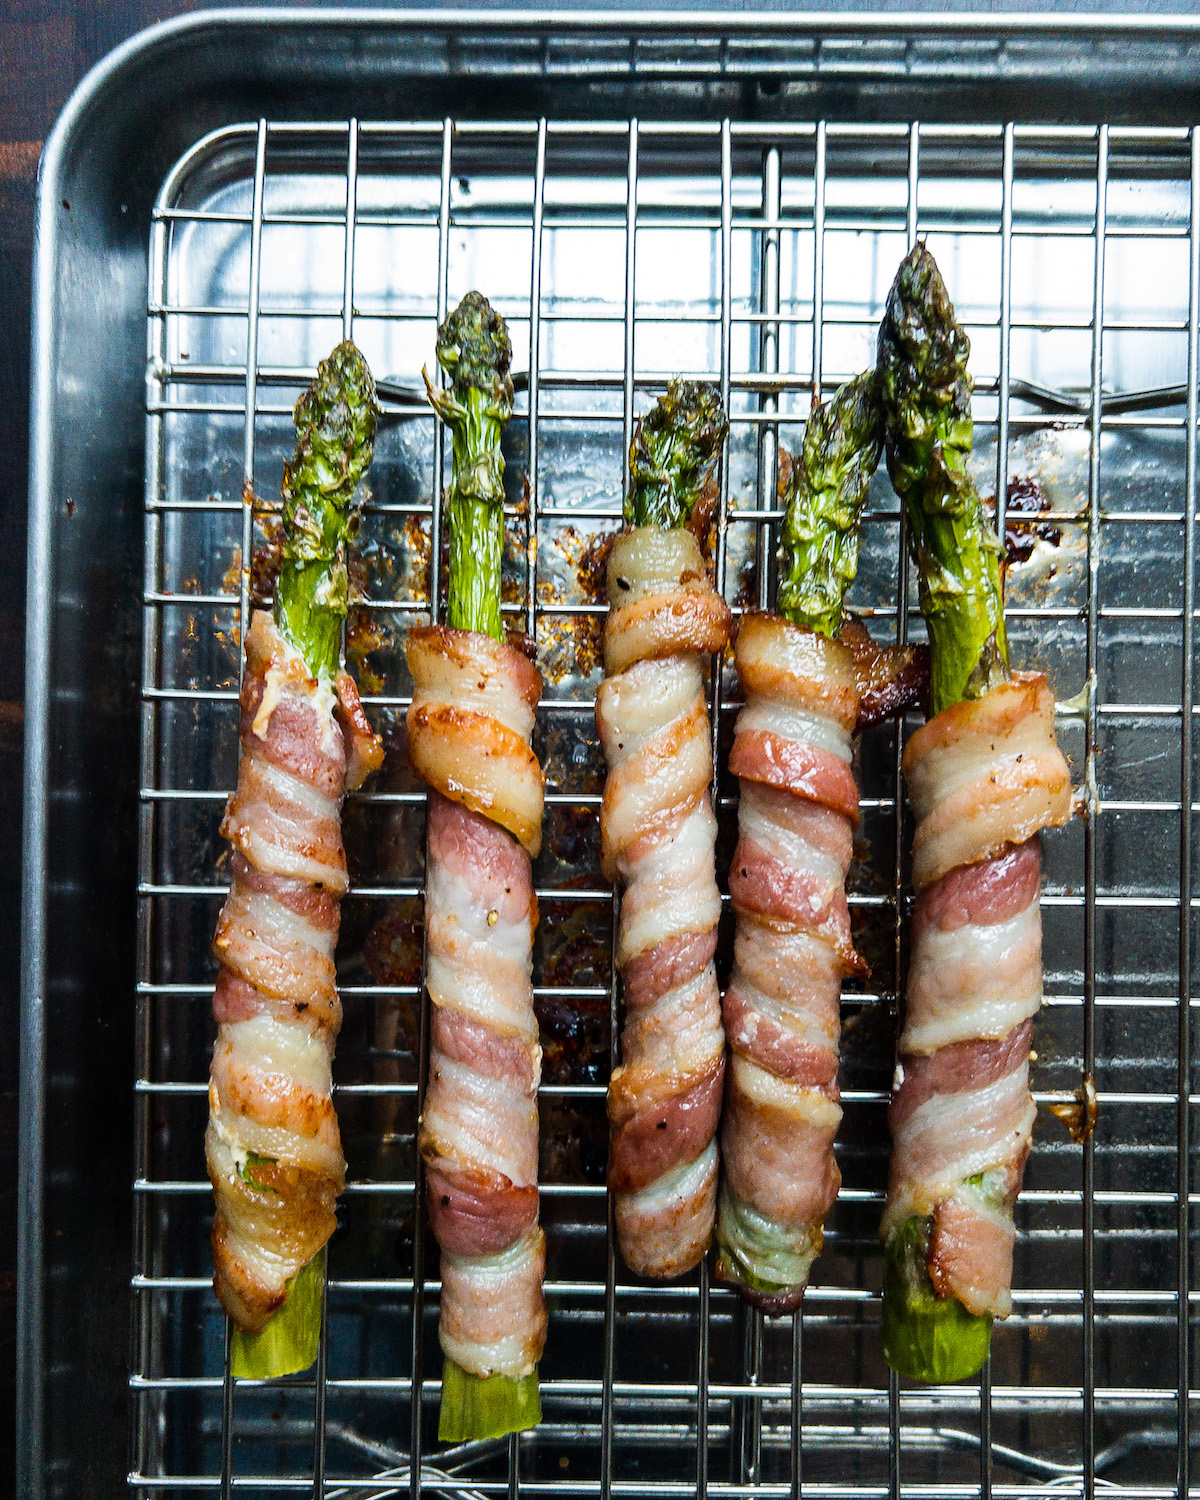 Overhead shot of bacon wrapped asparagus on a silver baking tray rack